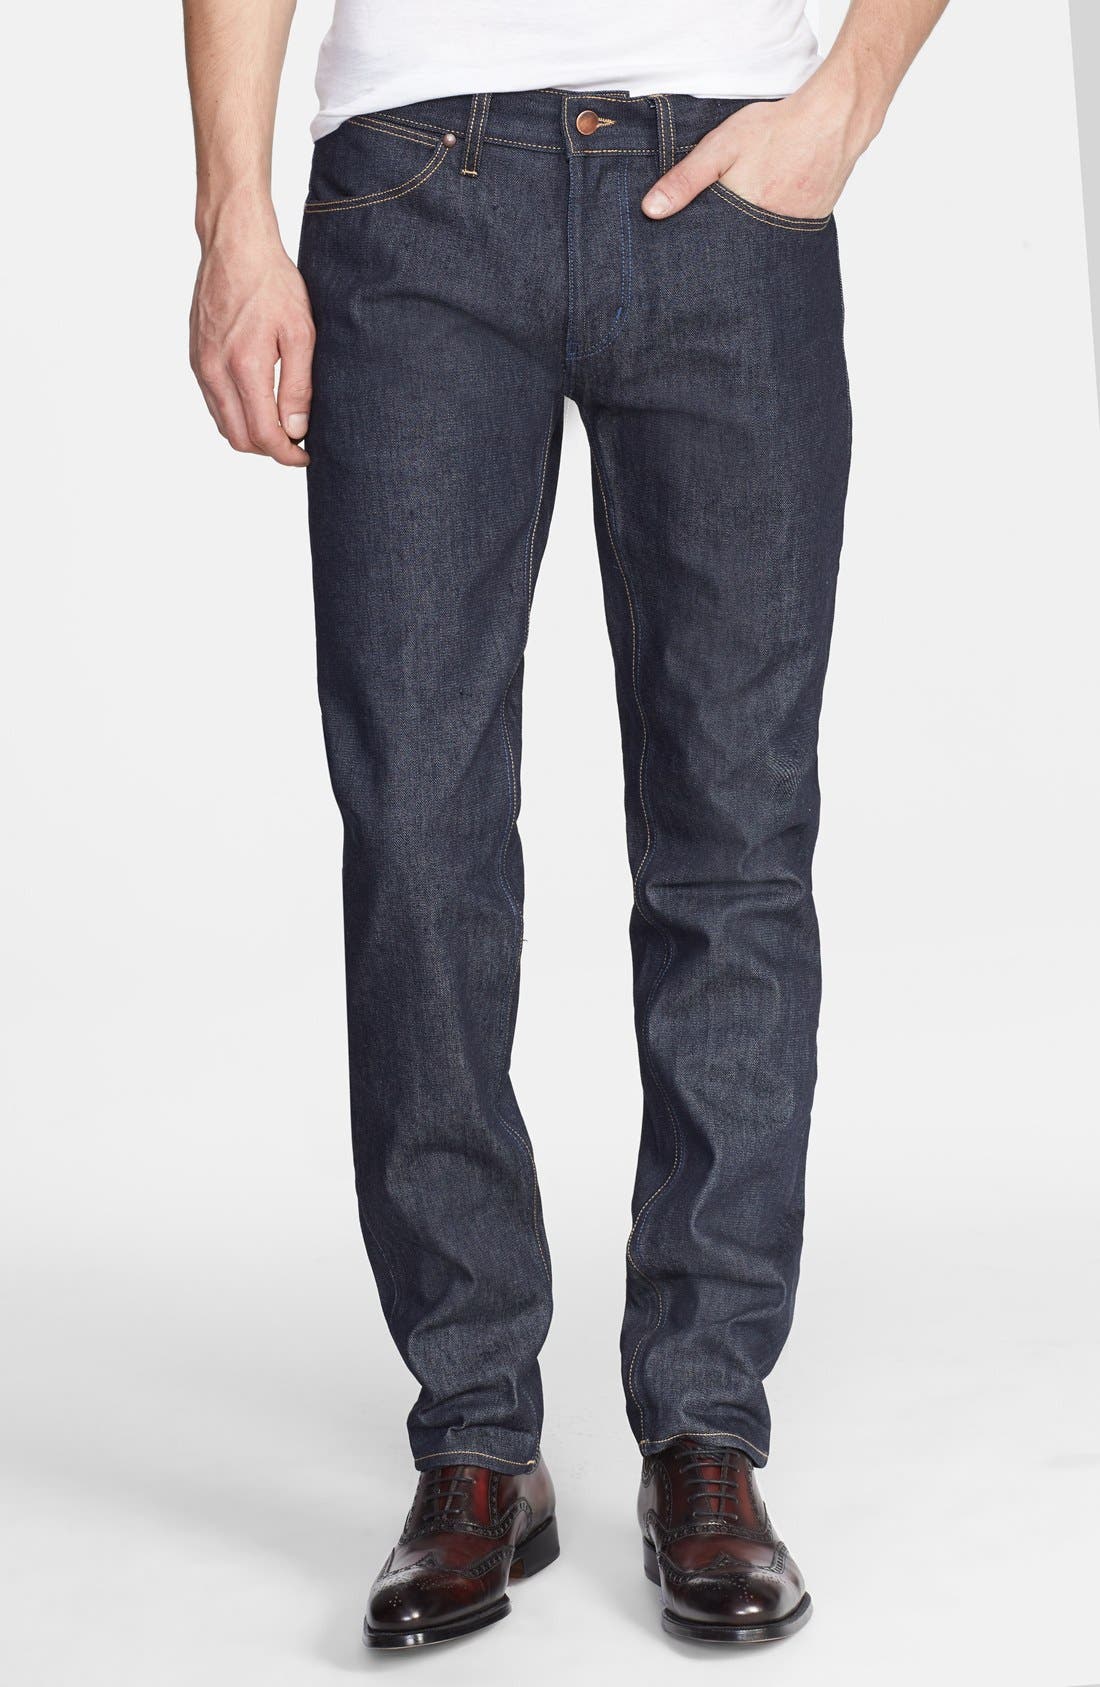 blue jeans with white stripe mens